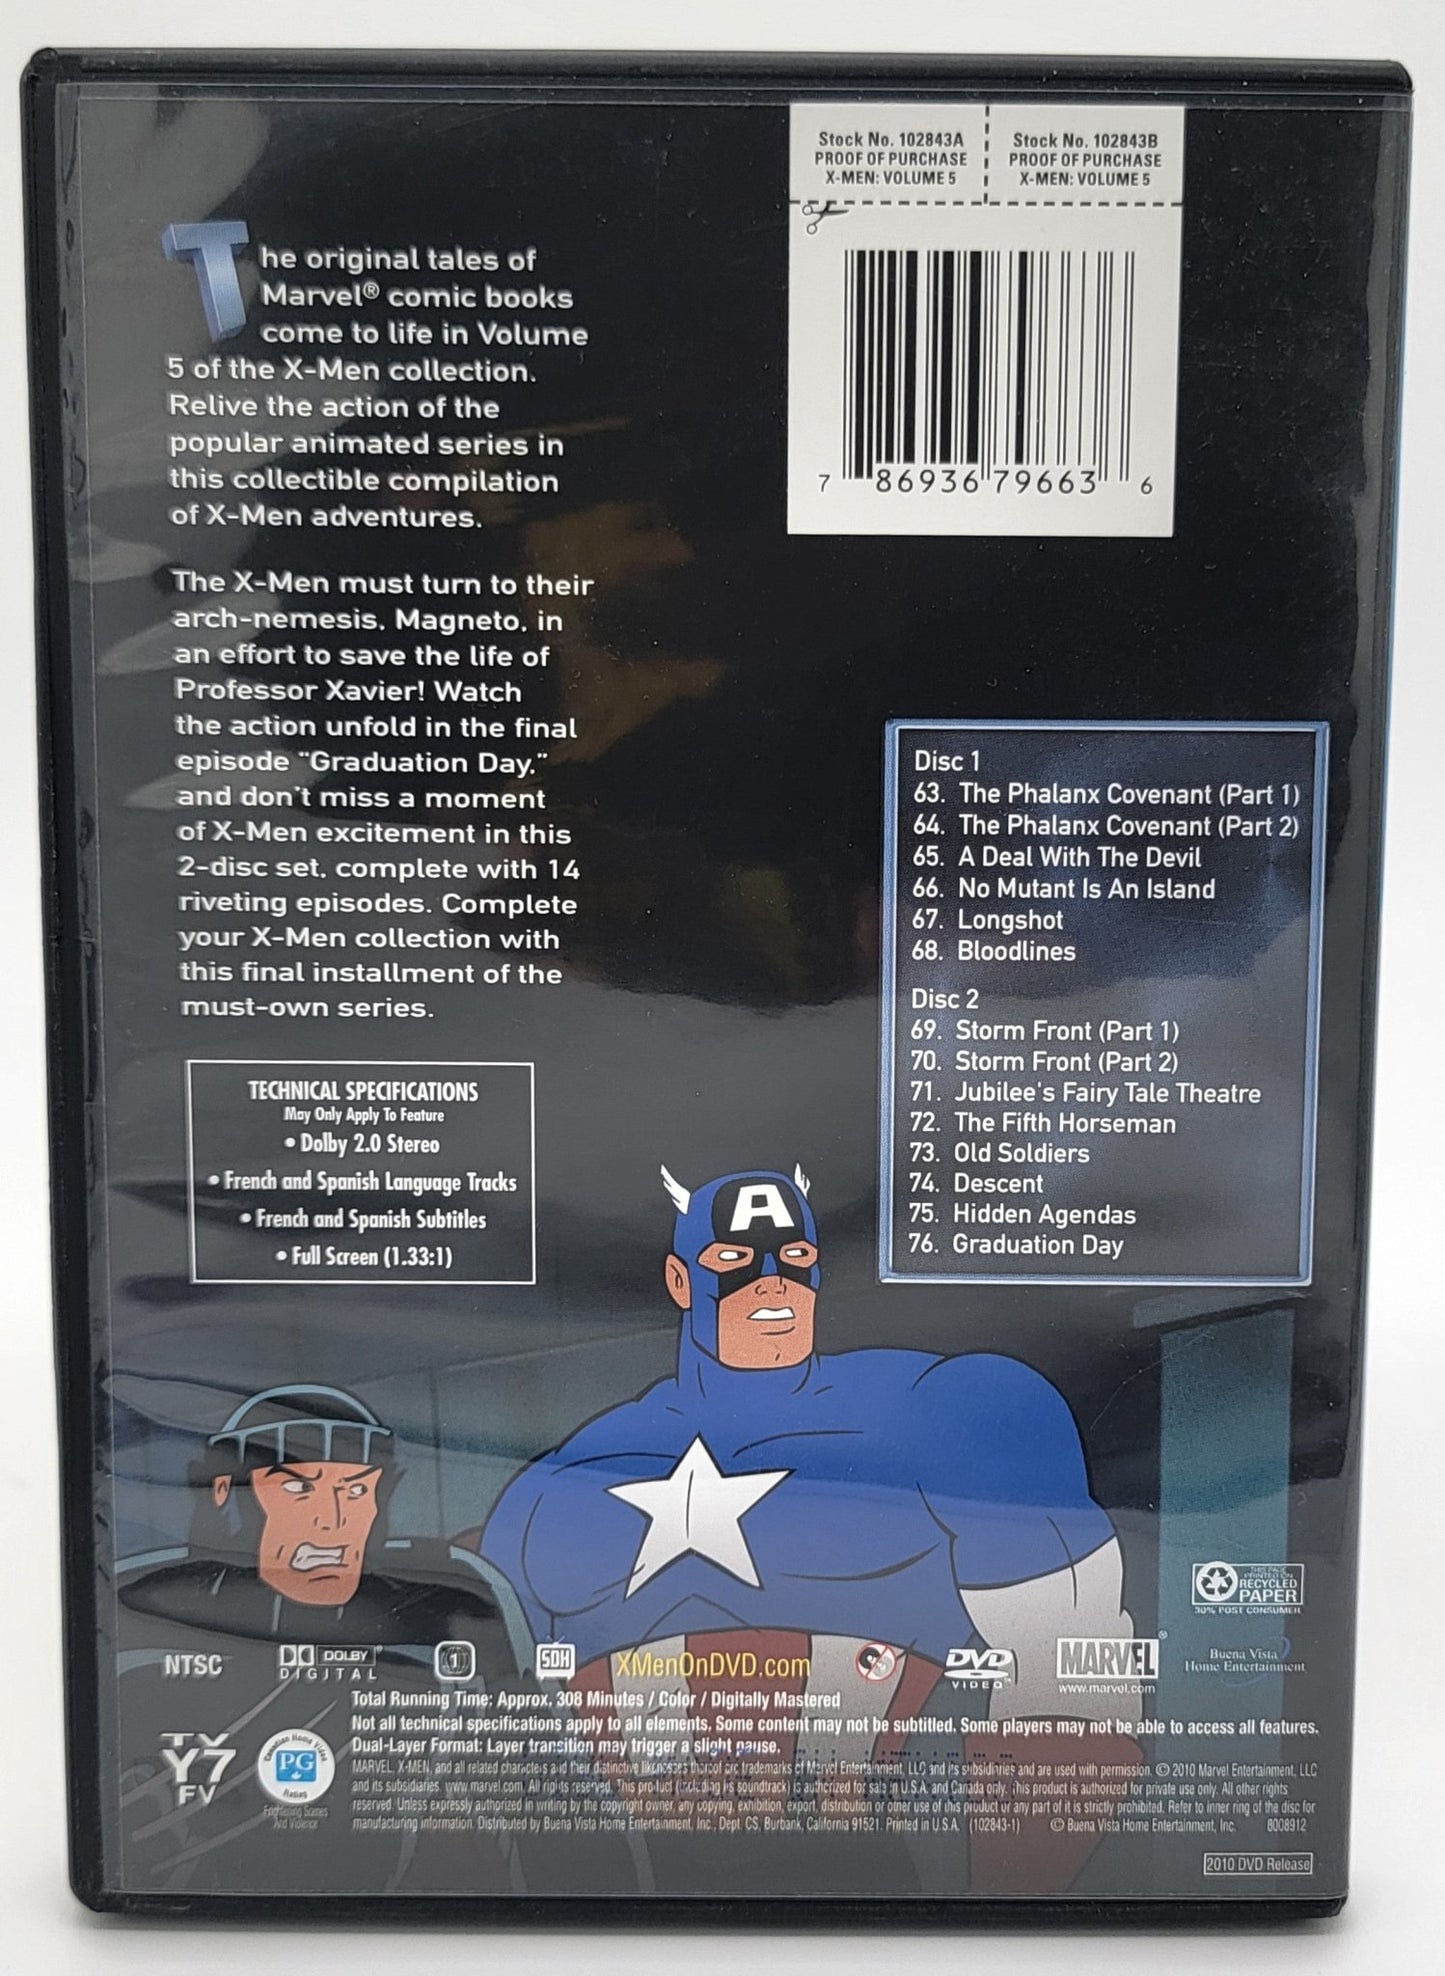 Marvel Studio - X-Men Old Soldiers Starring Captain America | DVD | Marvel DVD Comic Book Collection - Full Screen - DVD - Steady Bunny Shop